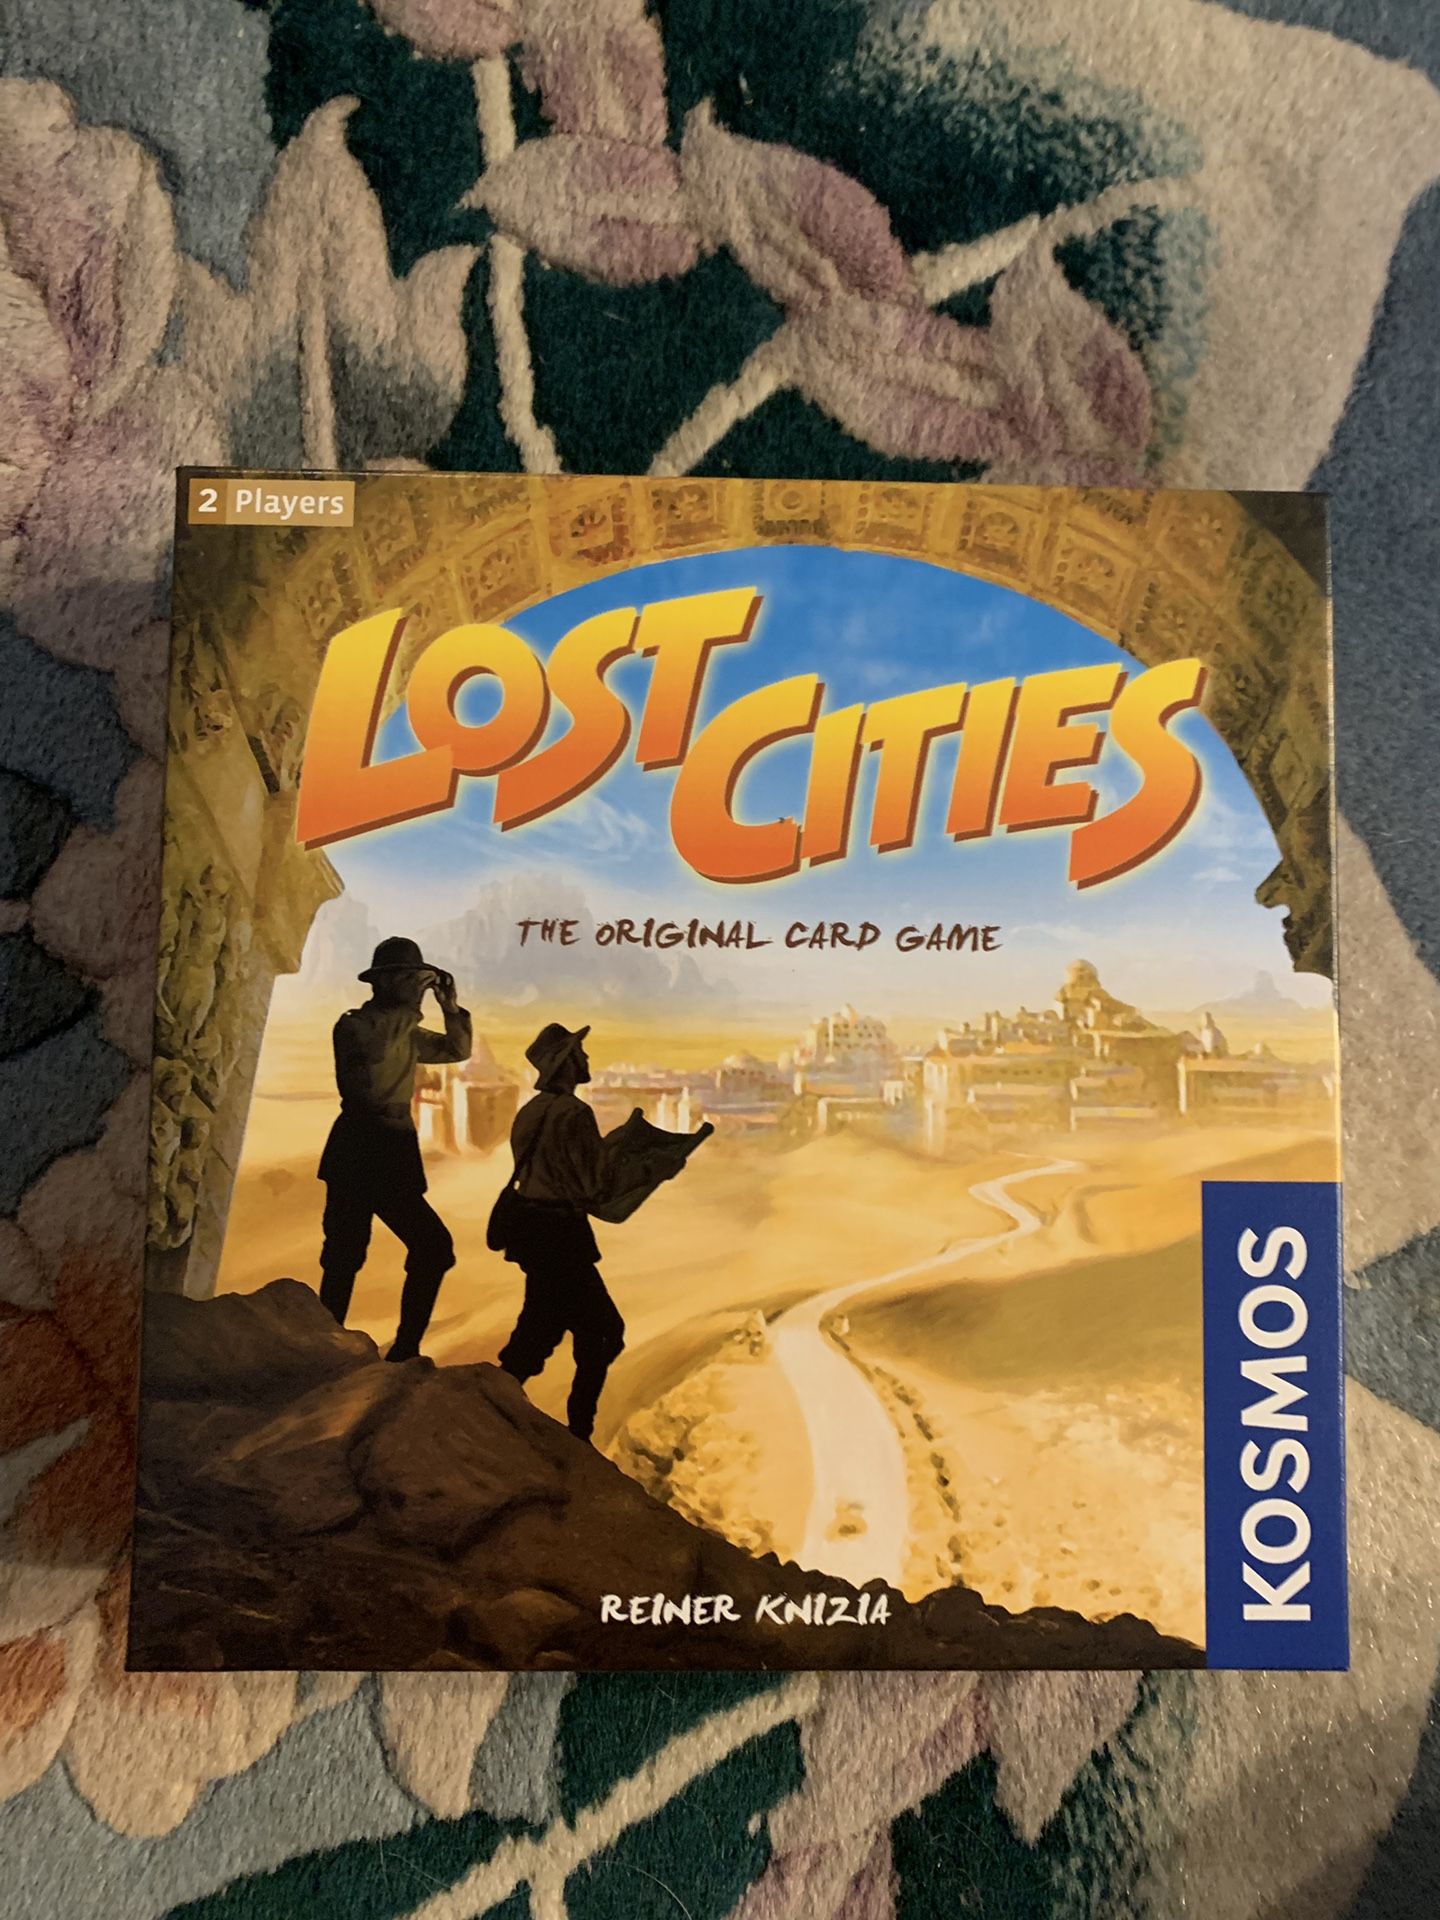 Lost cities card game/board game